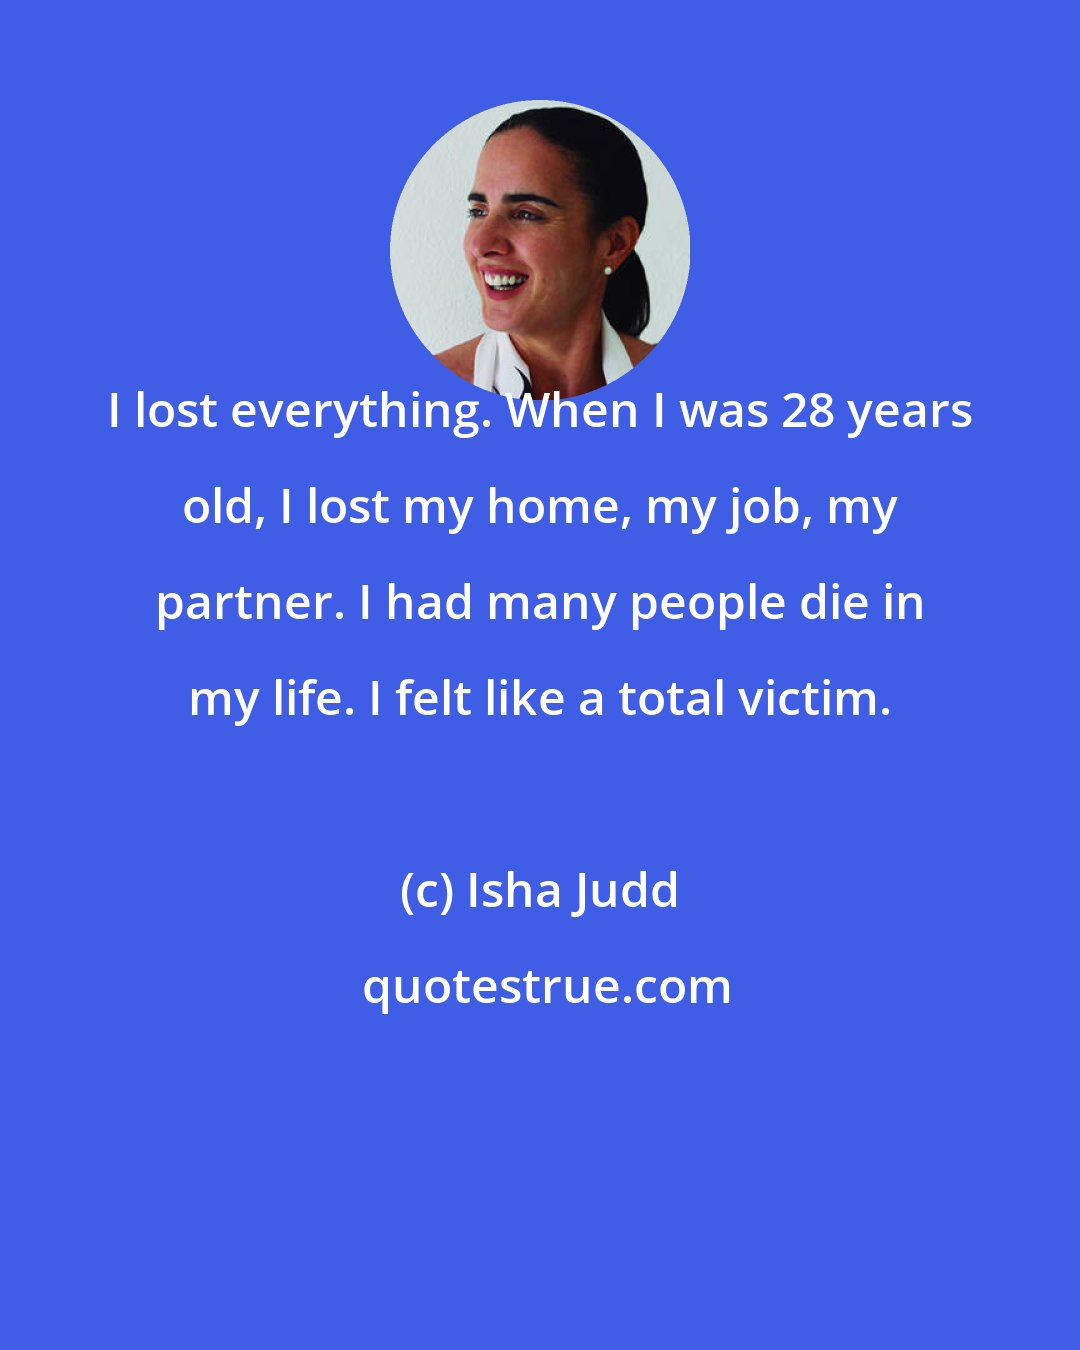 Isha Judd: I lost everything. When I was 28 years old, I lost my home, my job, my partner. I had many people die in my life. I felt like a total victim.